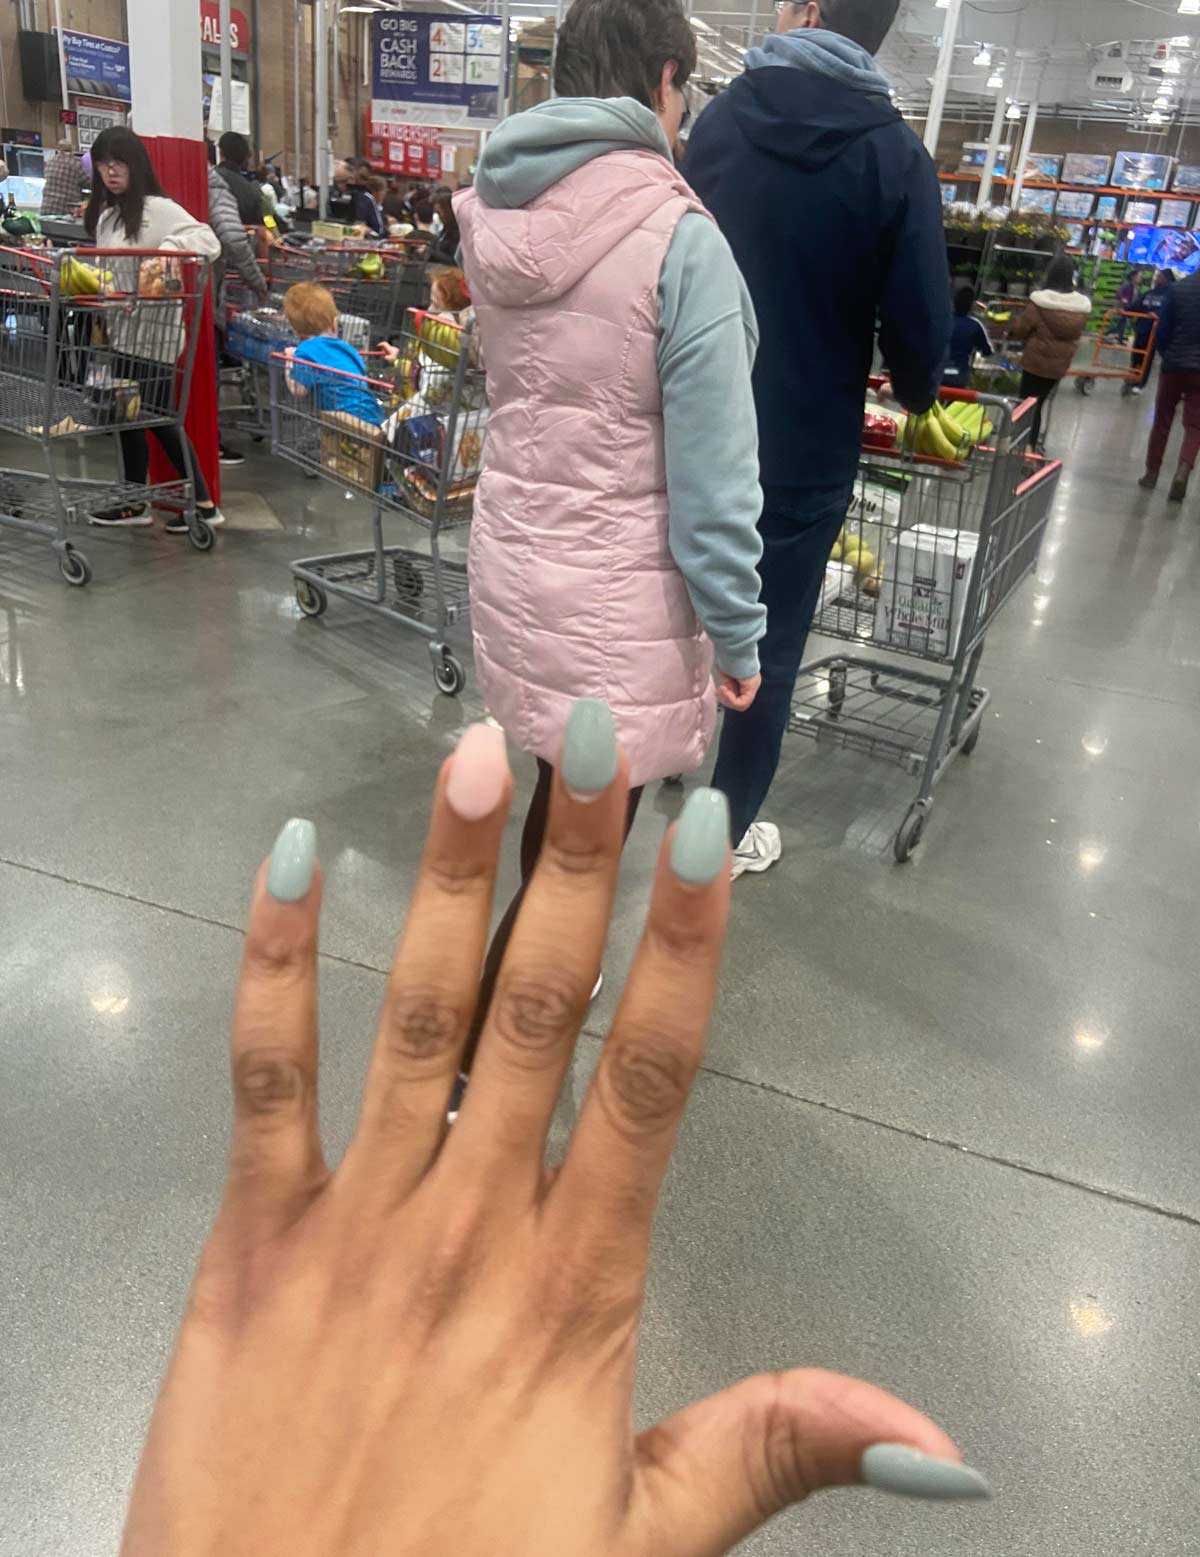 Lady at Costco matched my nails